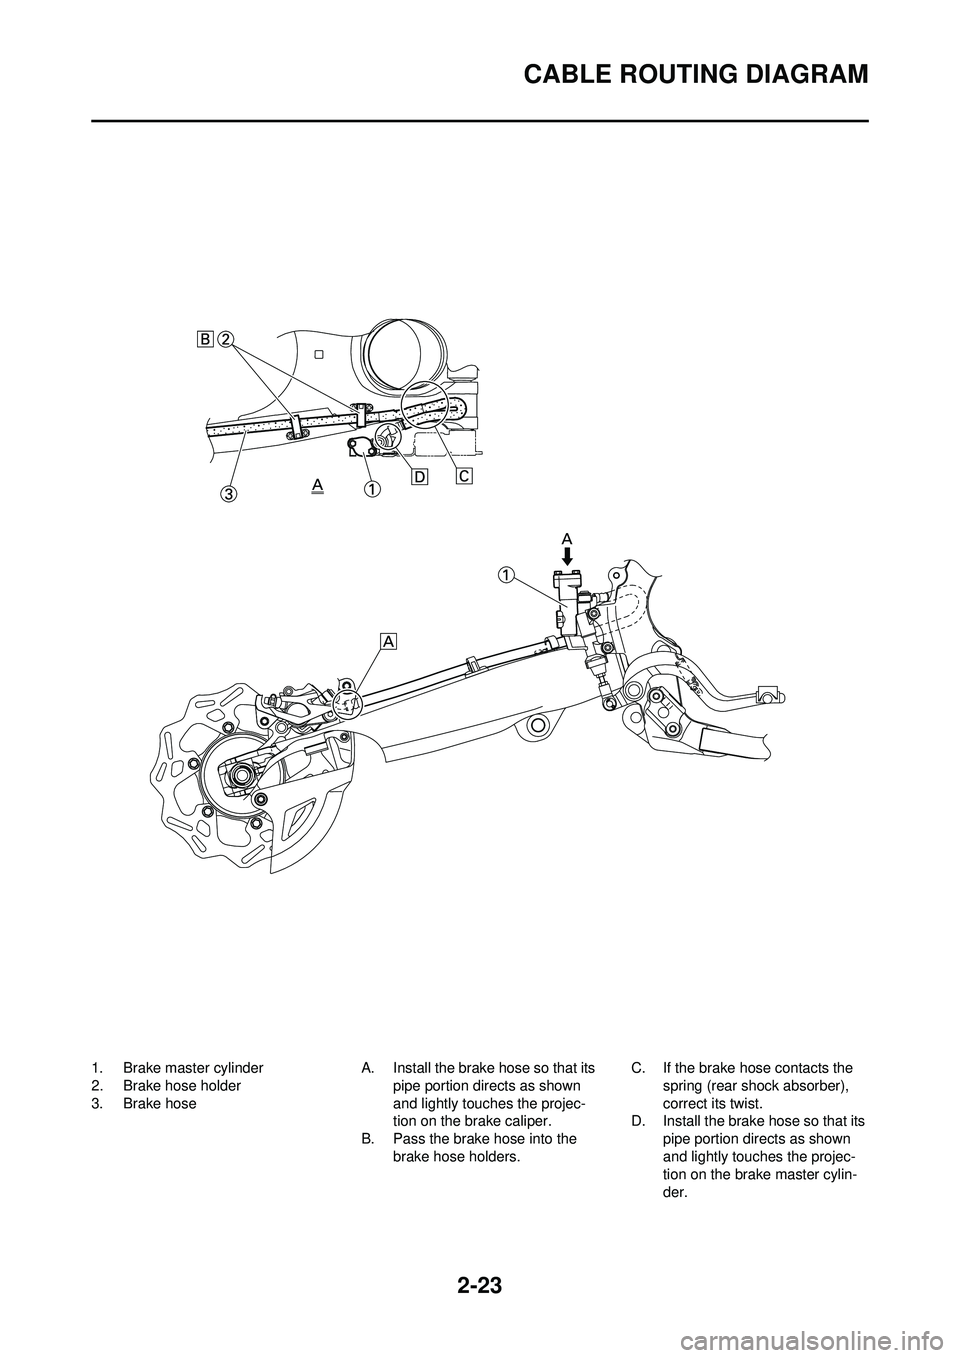 YAMAHA YZ250F 2010  Owners Manual 2-23
CABLE ROUTING DIAGRAM
1. Brake master cylinder
2. Brake hose holder
3. Brake hoseA. Install the brake hose so that its 
pipe portion directs as shown 
and lightly touches the projec-
tion on the 